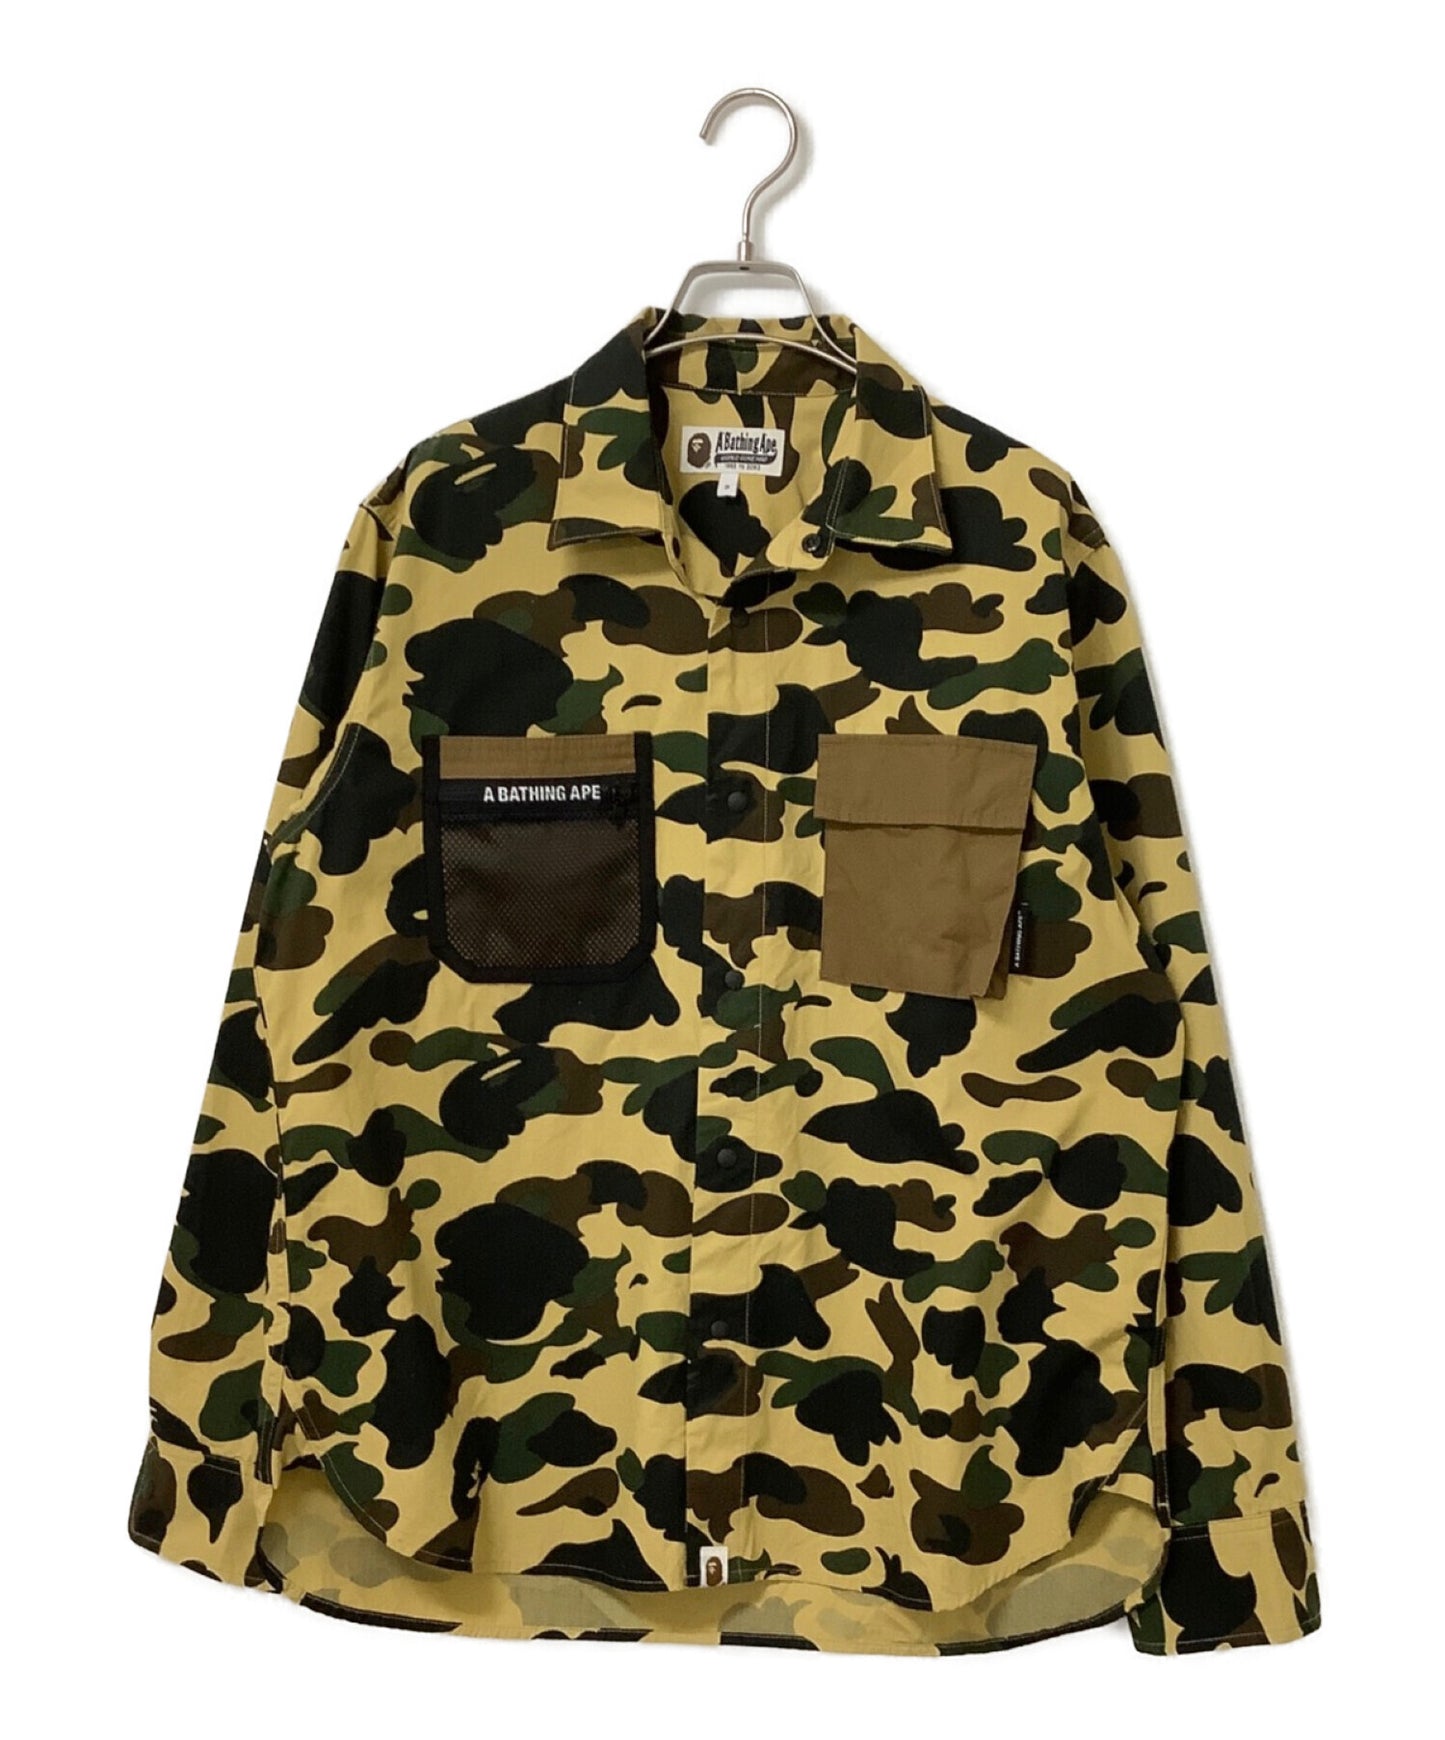 A BATHING APE 1ST CAMO OUTDOOR DETAIL POCKET RELAXED FIT SHIRT 001SHI801004M